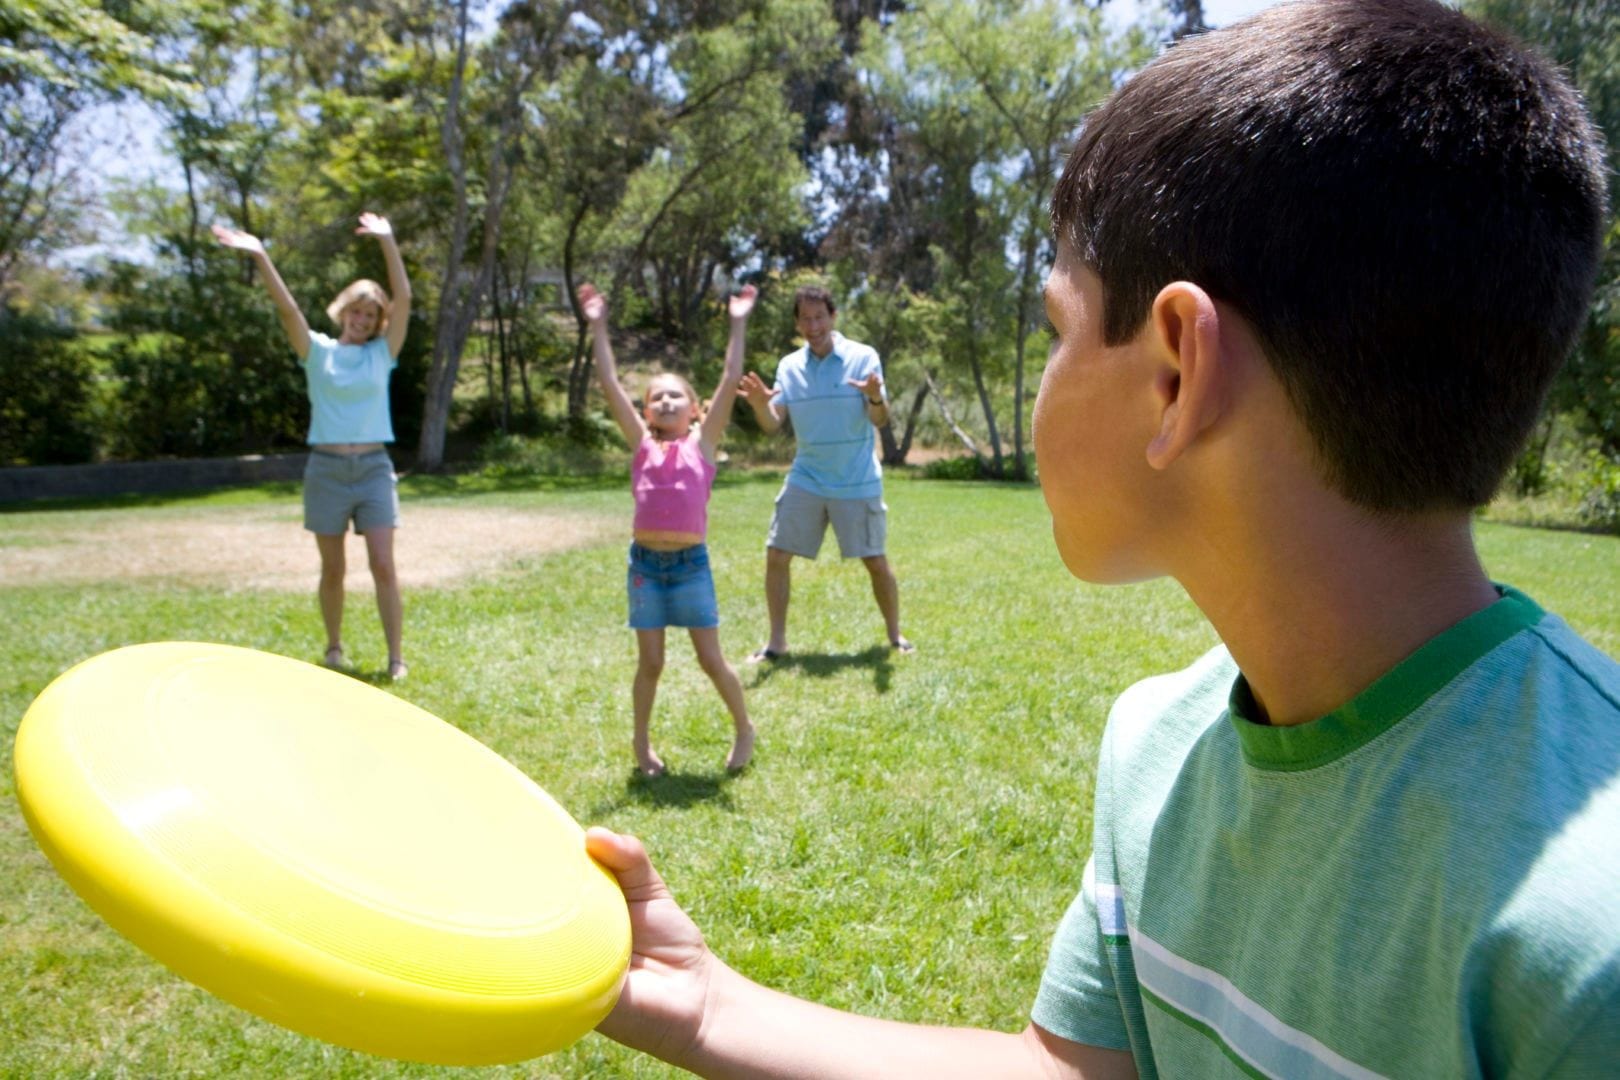 15 Frisbee games for kids